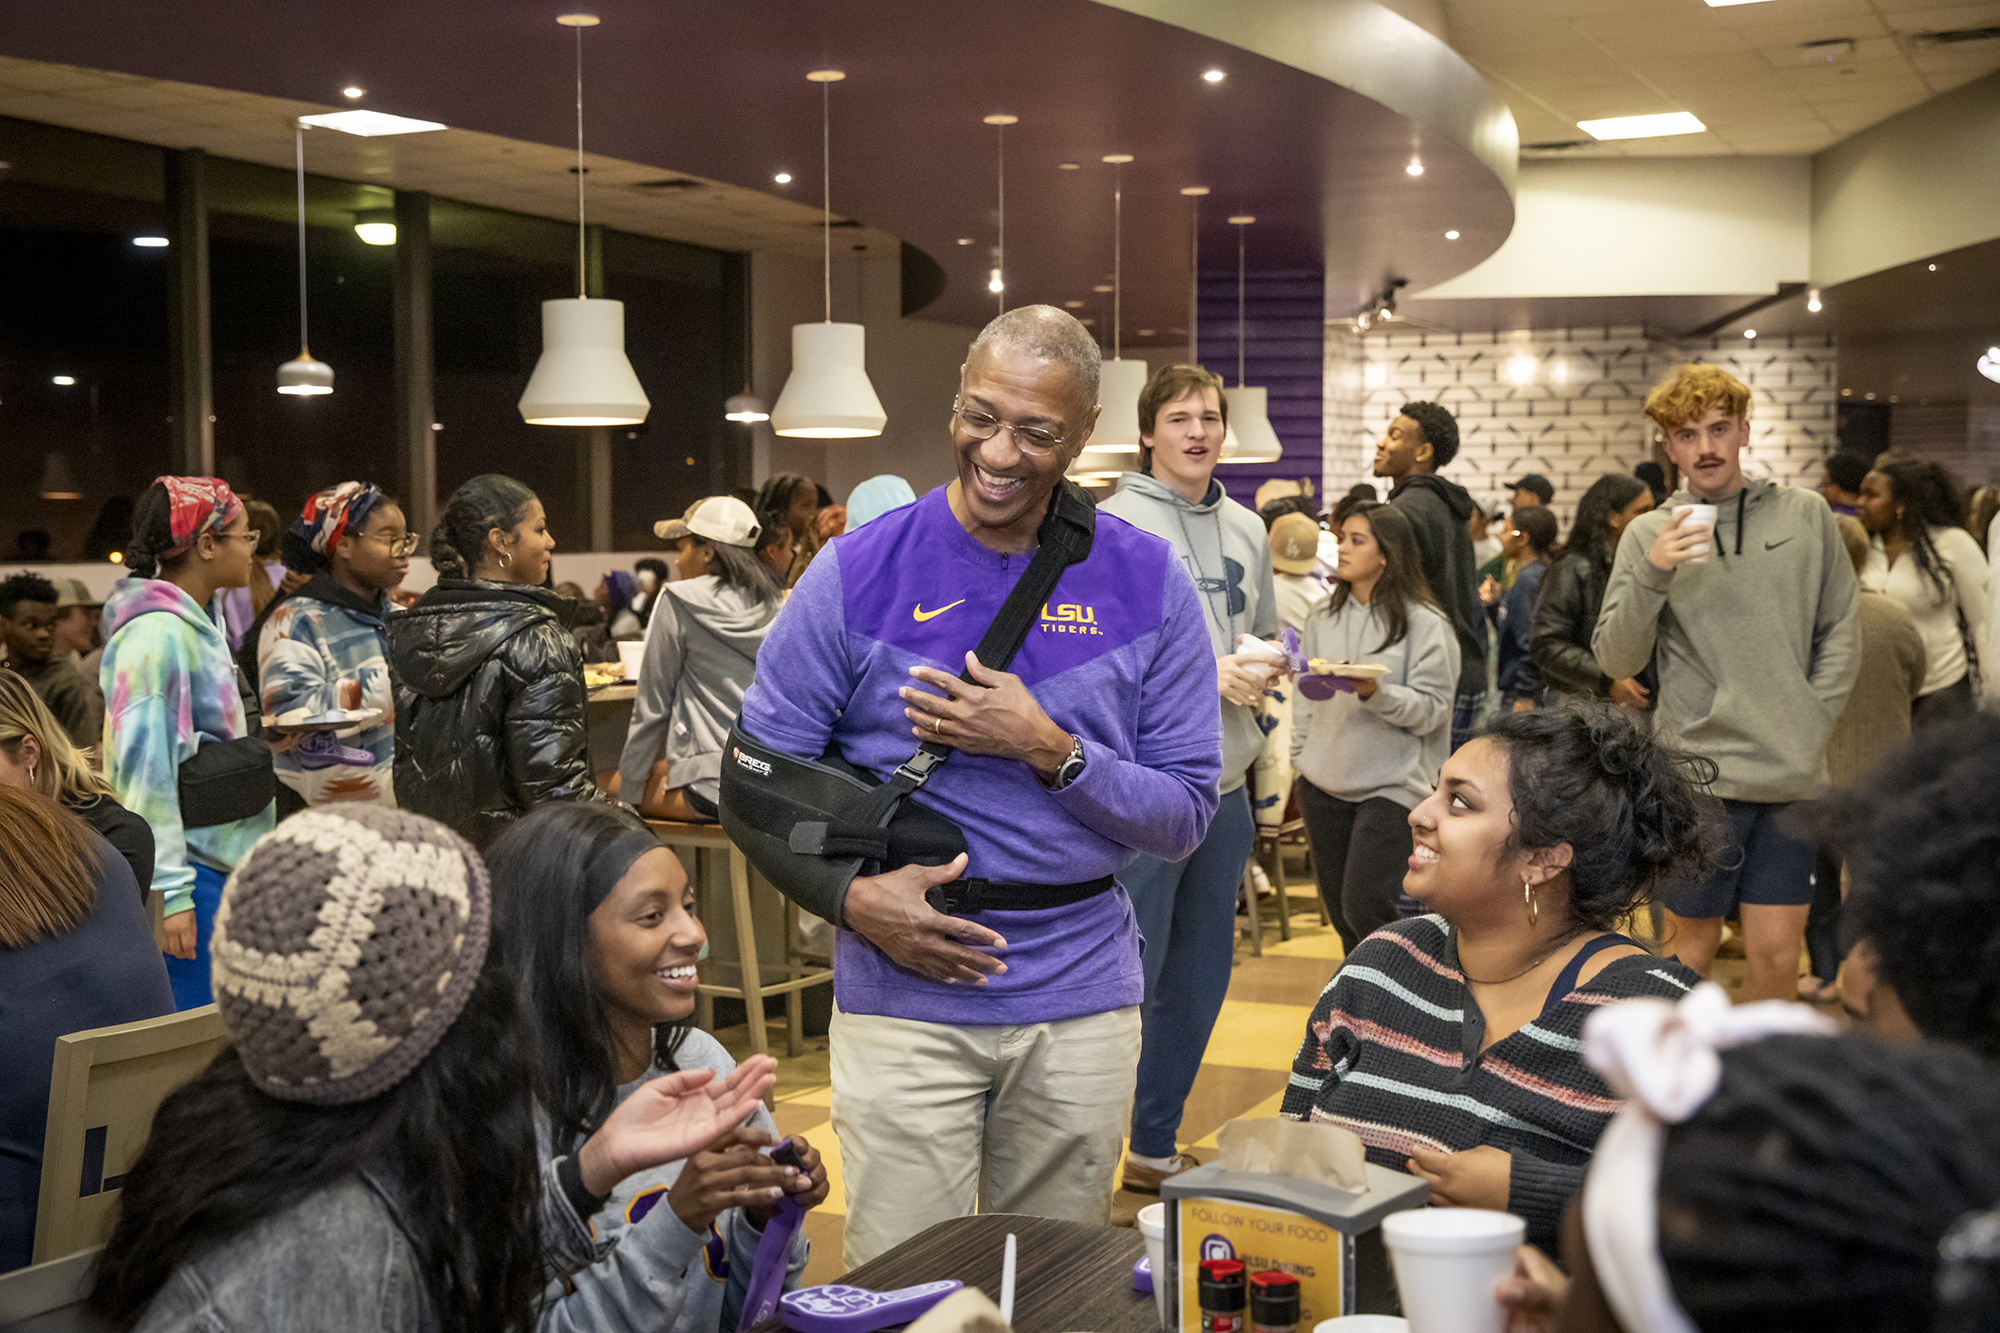 President Tate laughs with students at the President's Late Night Breakfast